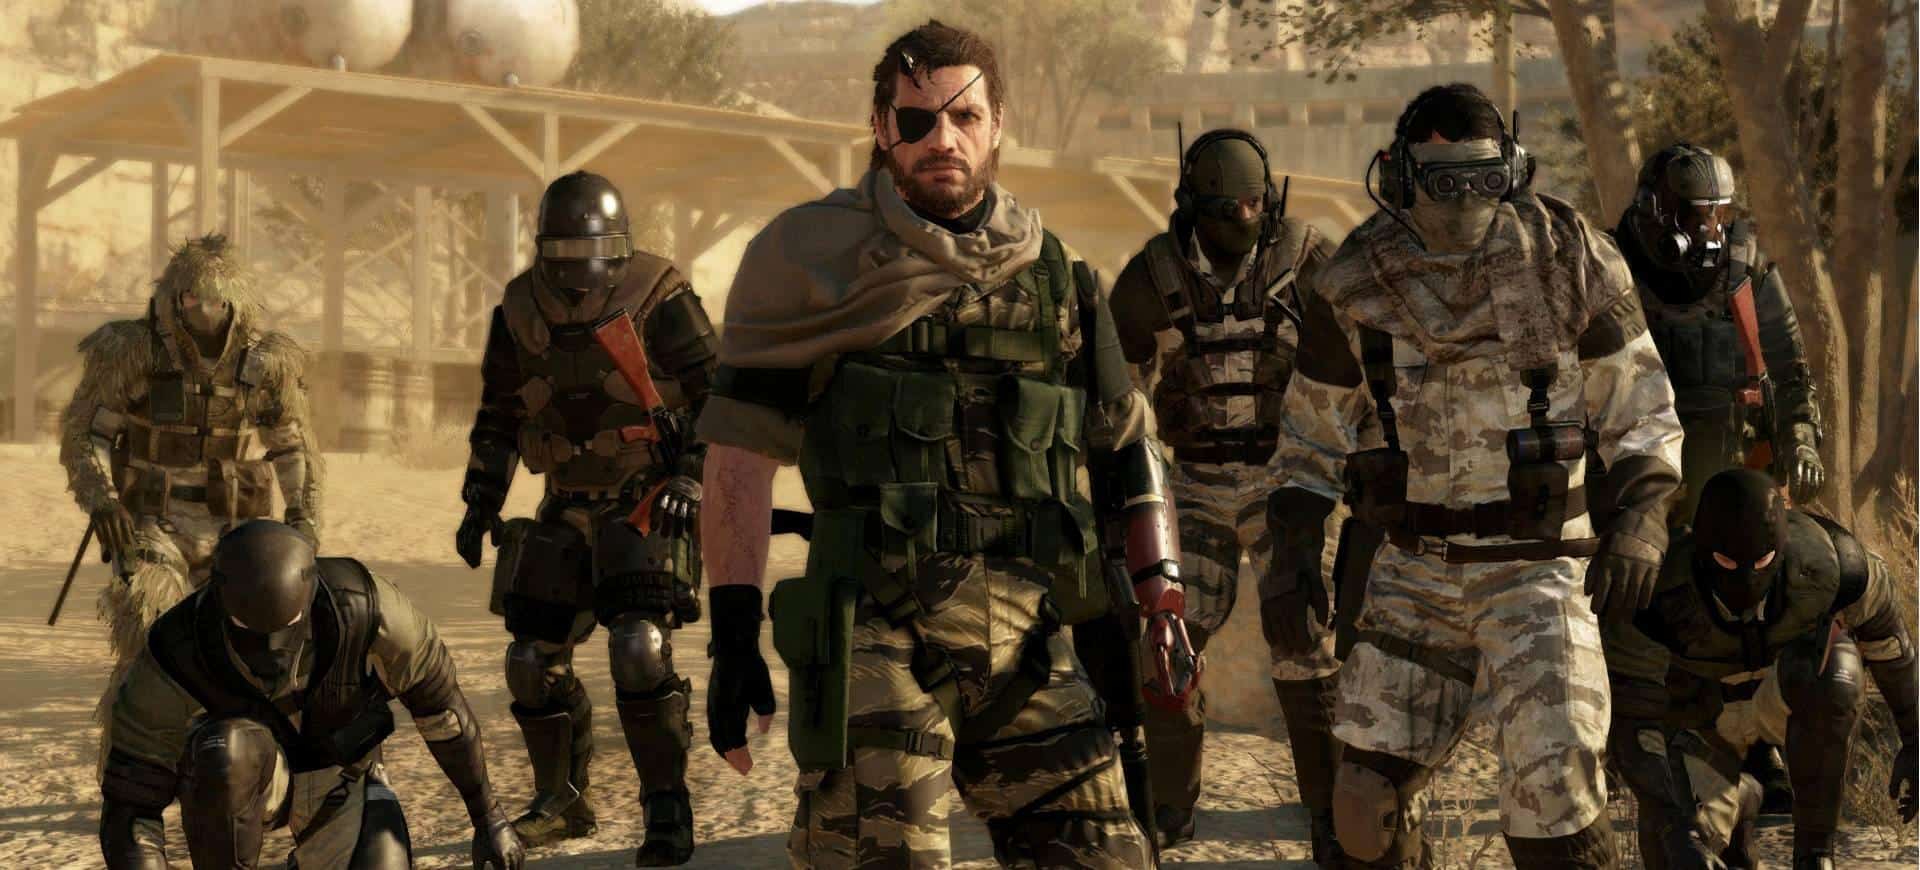 sins of the father mgs5